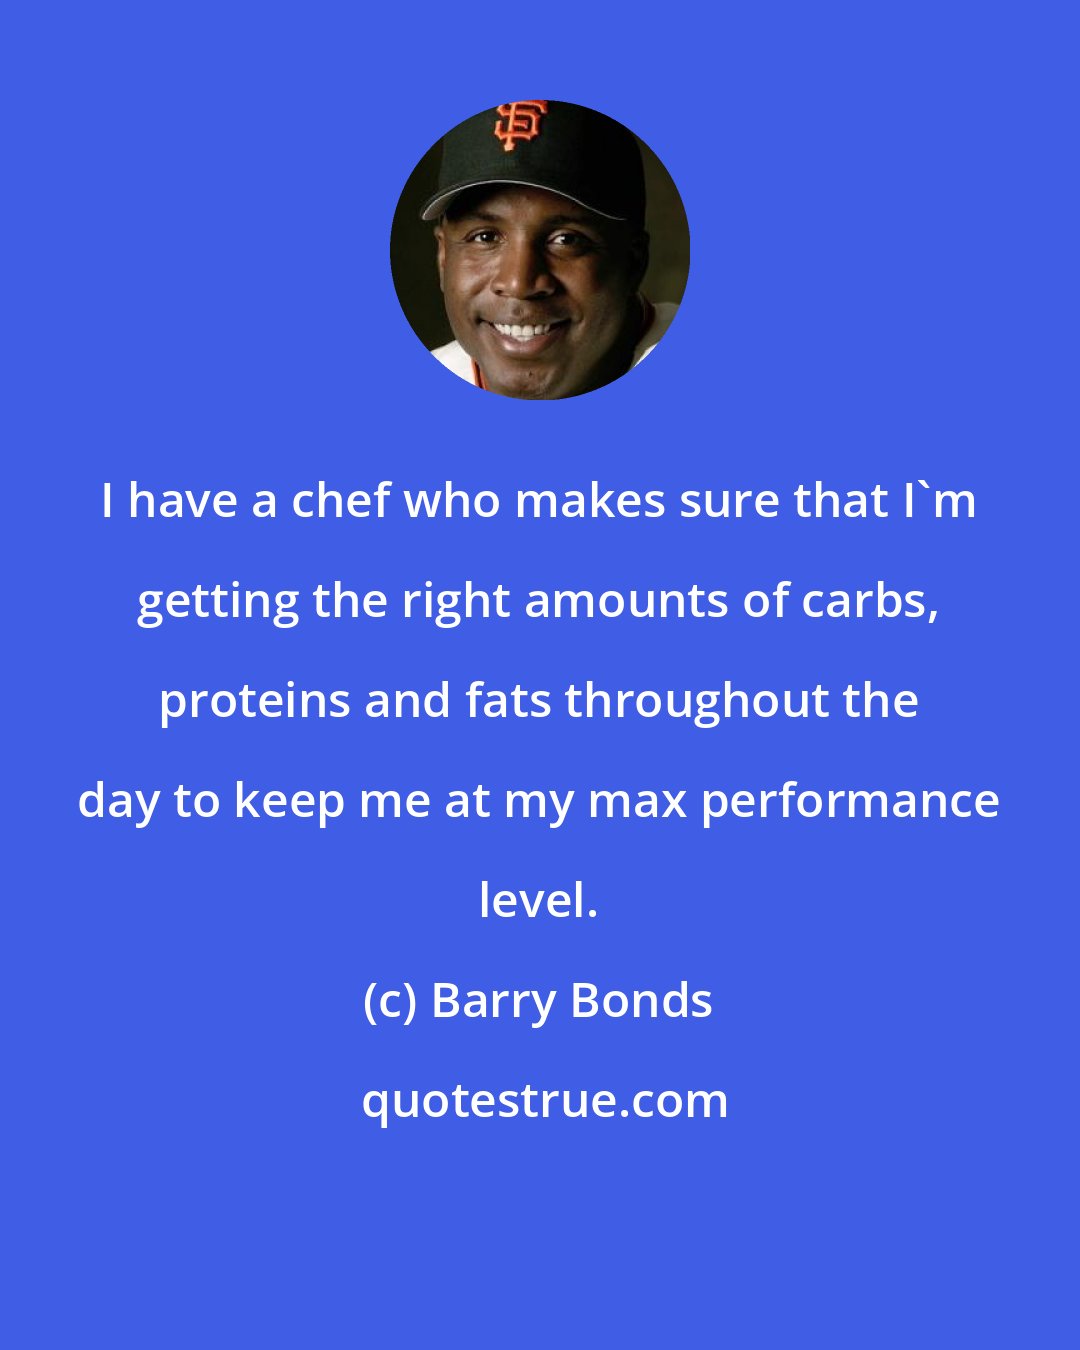 Barry Bonds: I have a chef who makes sure that I'm getting the right amounts of carbs, proteins and fats throughout the day to keep me at my max performance level.